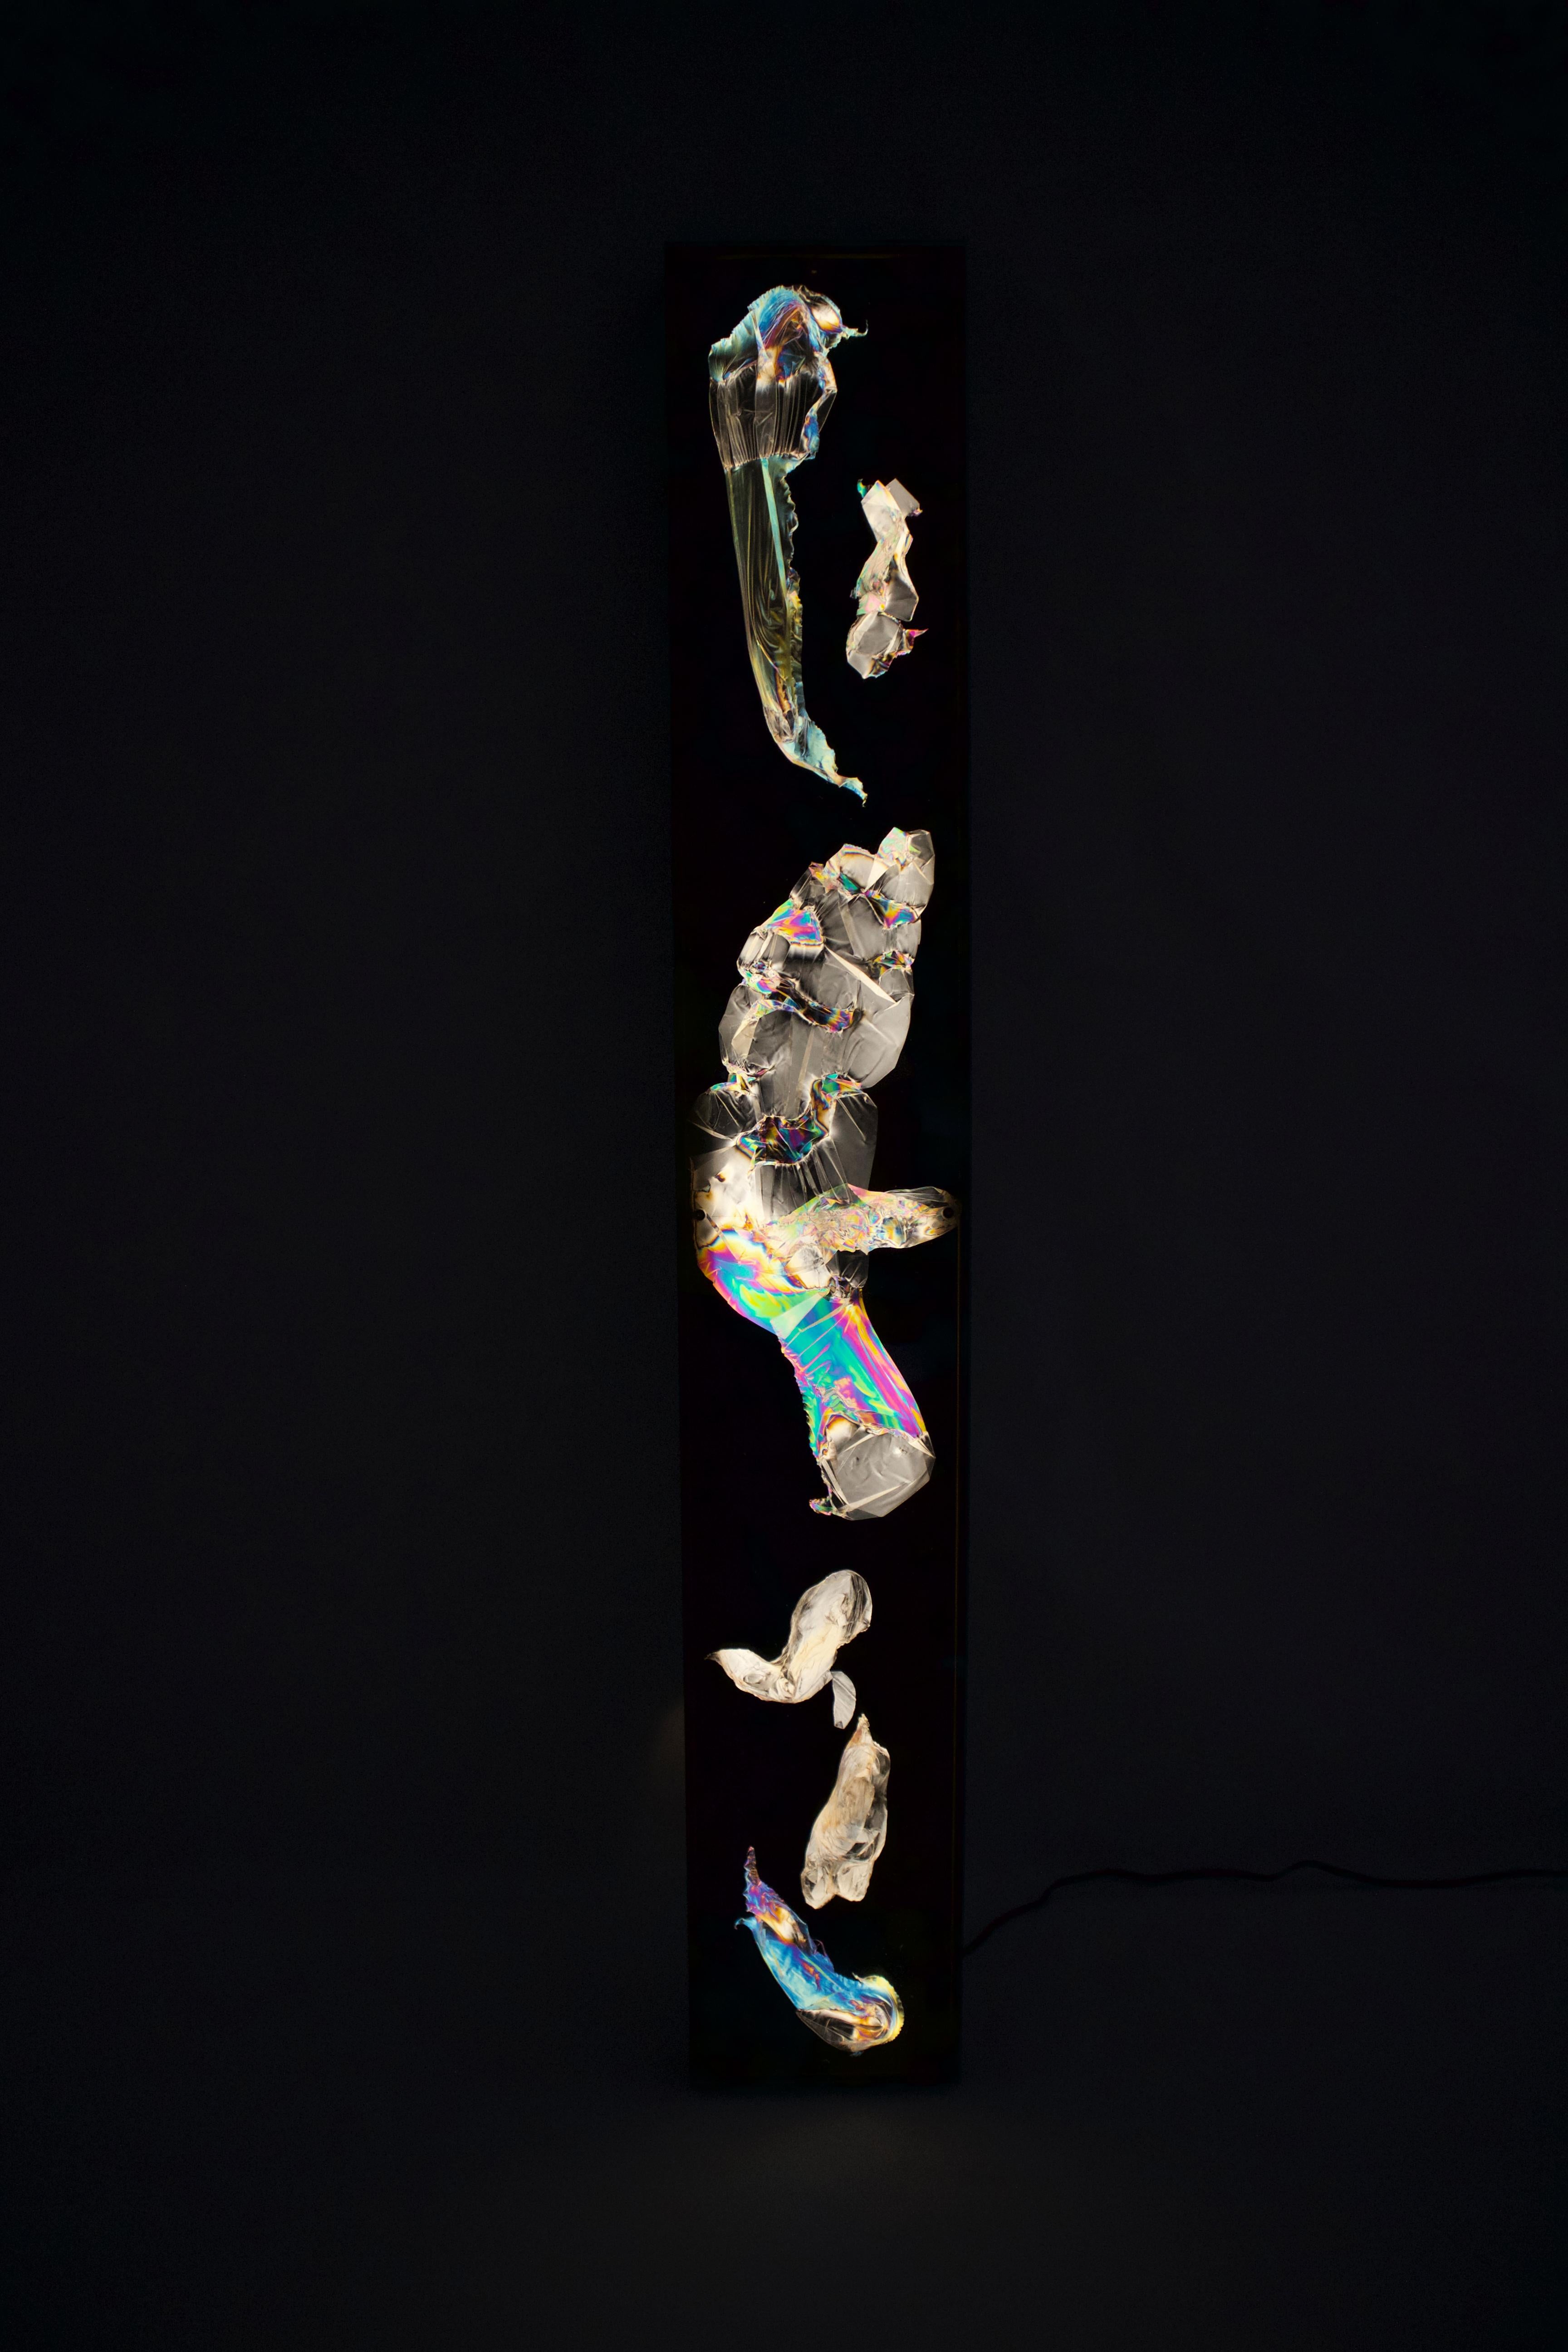 Leaning lamp by Kajsa Willner
Dimensions: 100 x 14 x 4cm
Materials: polarized filters, disposable plastic

Polarized Portraits
Polarized portraits is a set of wall lights and lamps that use polarized light to reveal stress patterns in clear